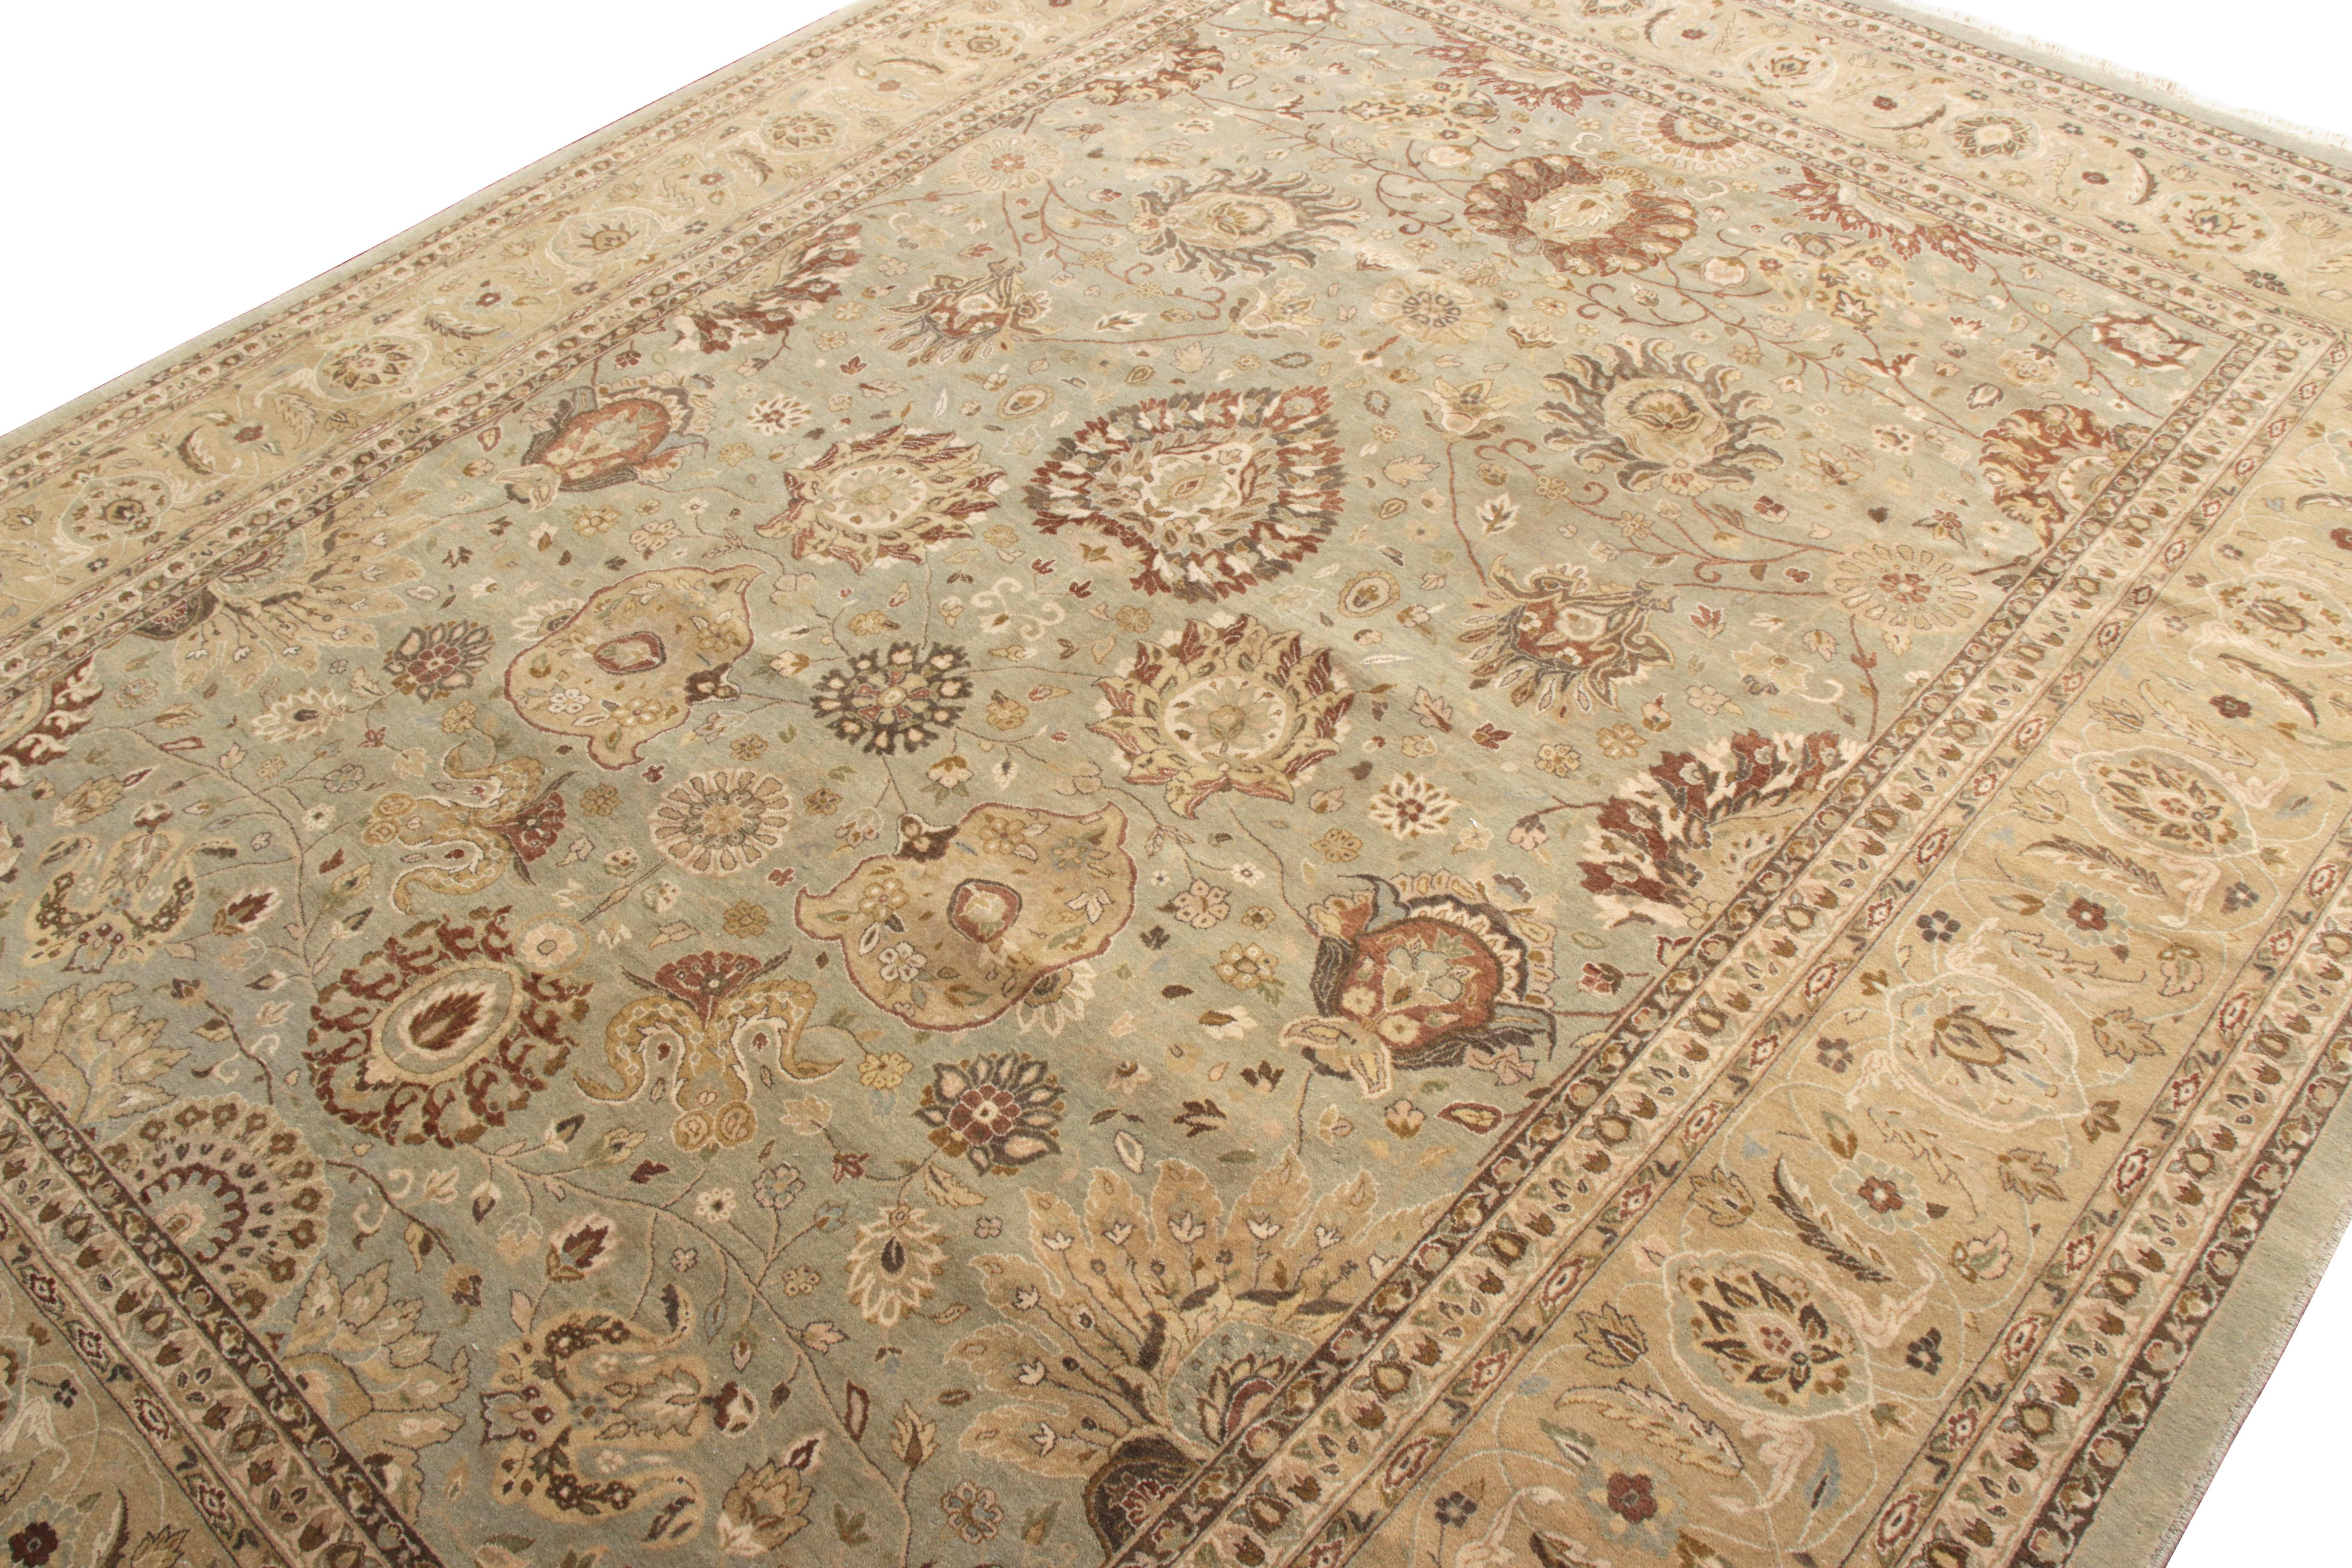 Pakistani Rug & Kilim’s Tabriz style Rug in Beige-Brown and Green Floral Pattern